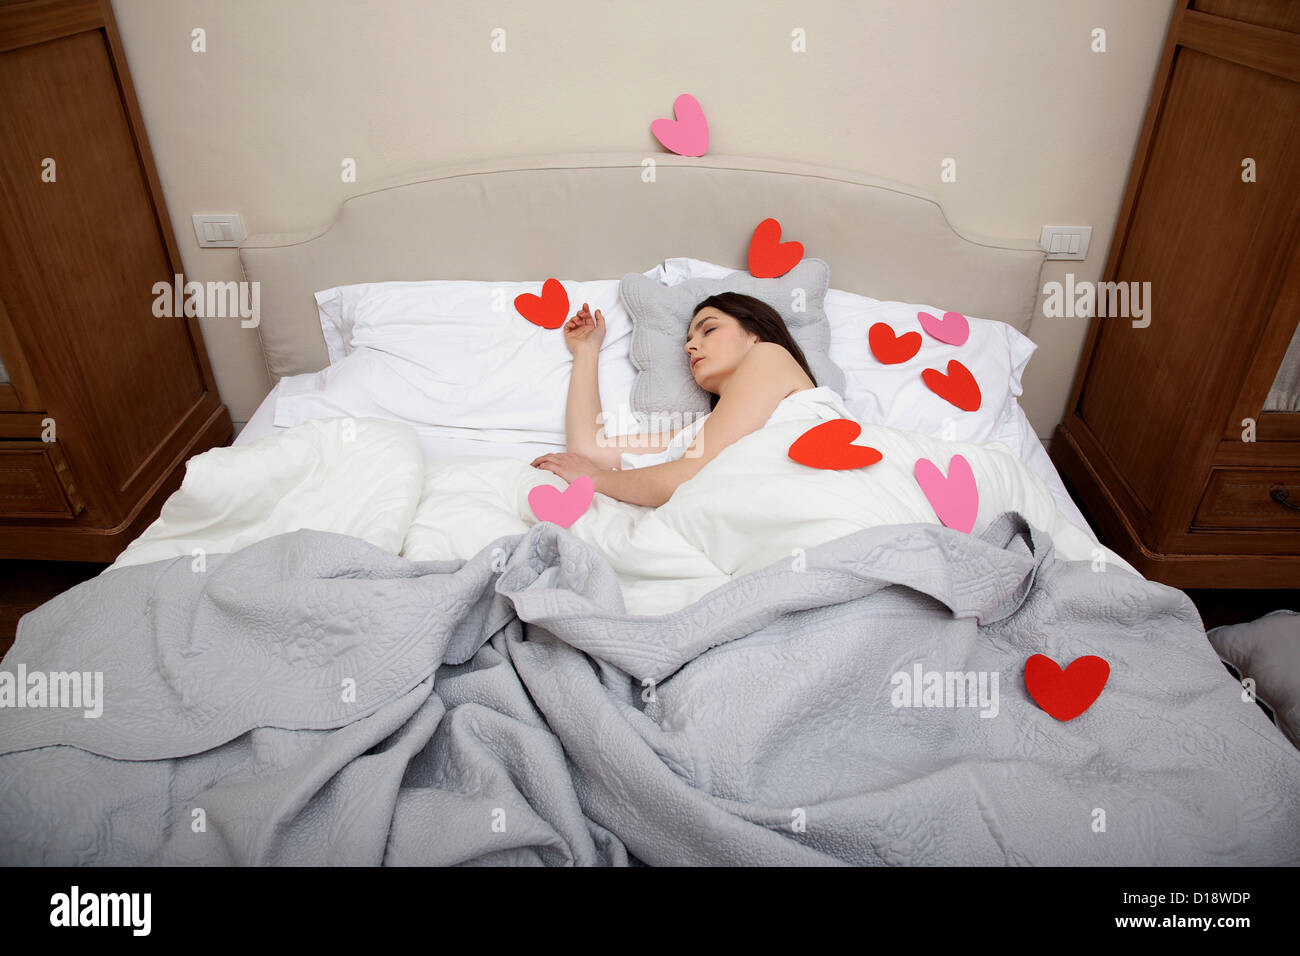 Woman asleep in bed with heart shapes on bedclothes Stock Photo